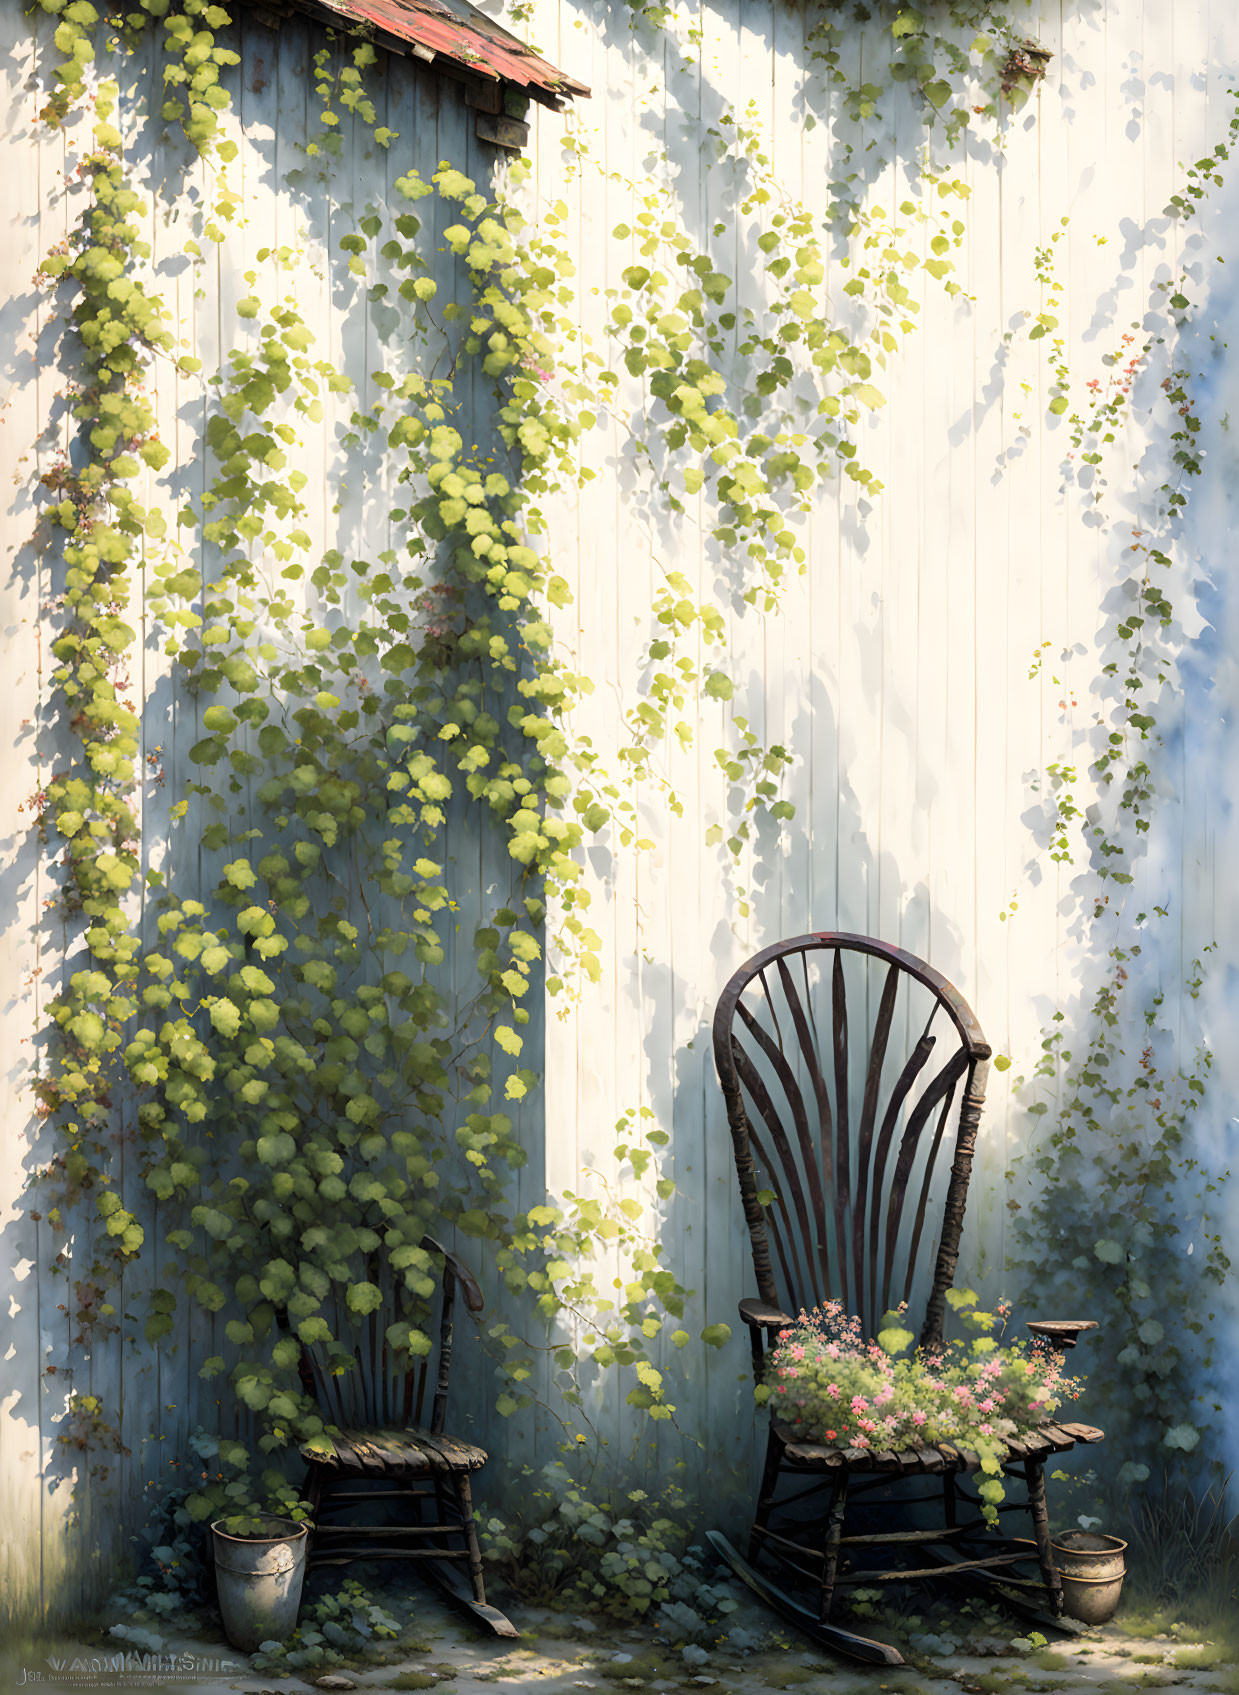 Rustic barn wall with wooden rocking chair and potted flowers